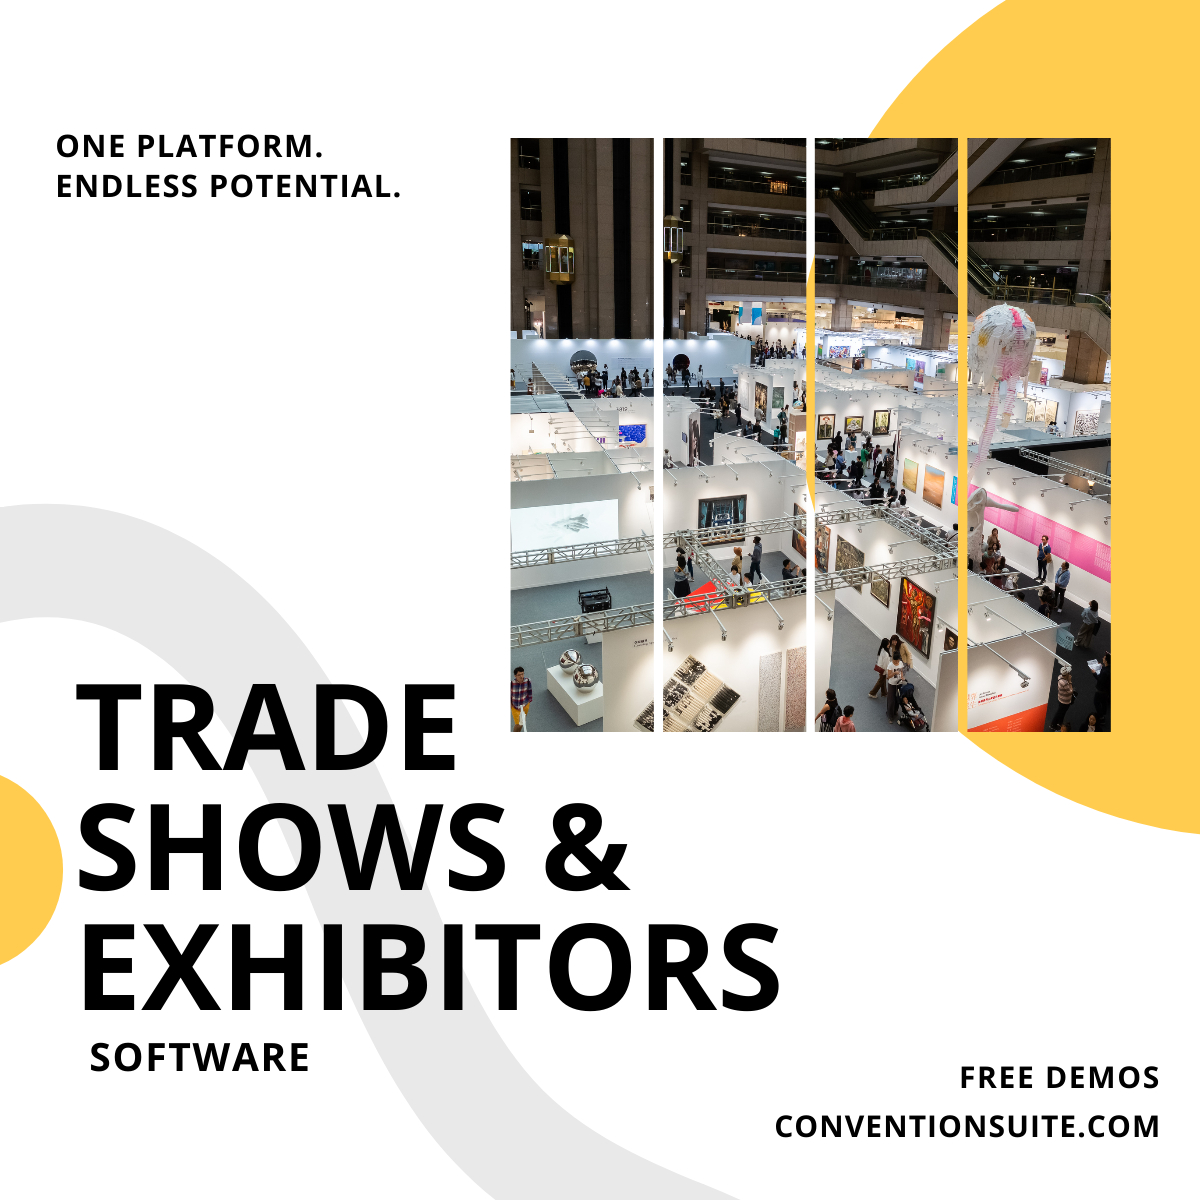 Solutions for a great exhibitor experience.
conventionsuite.com/exhibit-houses…

#exhibitors #exhibition #tradeshow #exhibitions #expo #exhibitor #exhibitionstanddesign #tradeshows #tradeshowdisplays #exhibitionstand #tradeshowbooth #tradeshowdisplay #tradeshowdesign #expo